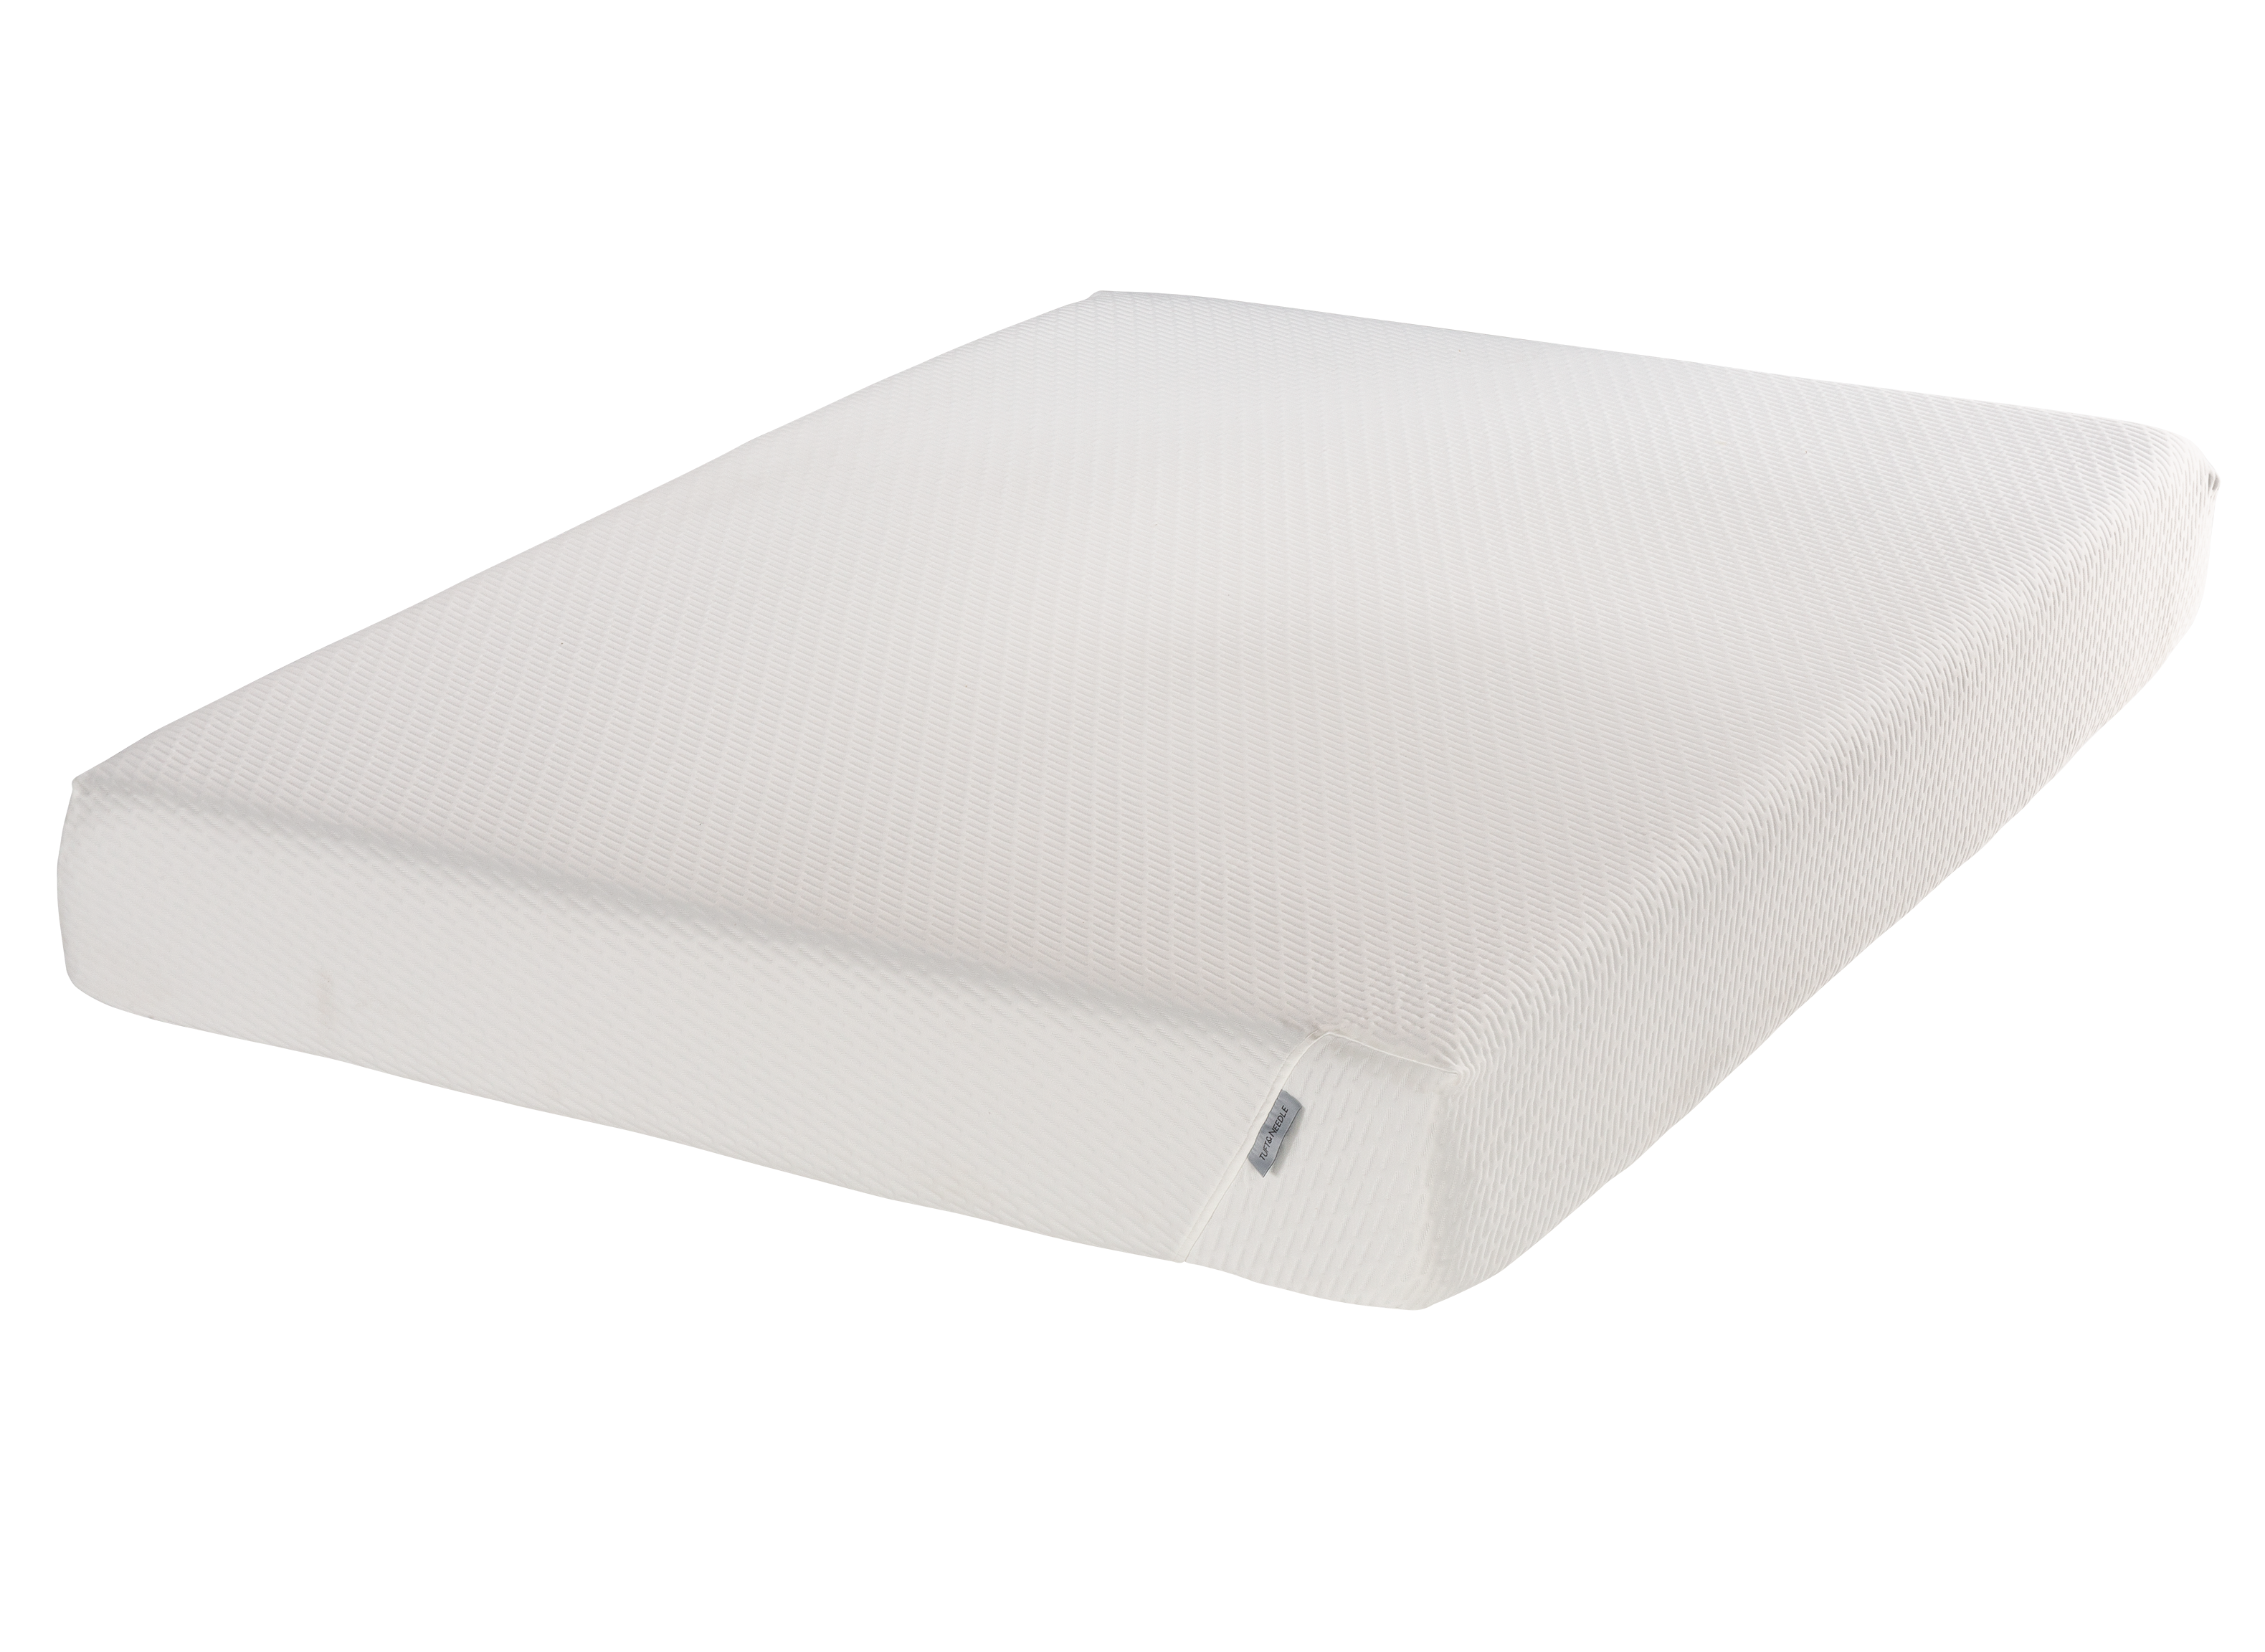 https://crdms.images.consumerreports.org/prod/products/cr/models/269178-foam-tuft-needle-t-n-original-mattress-10030998.png